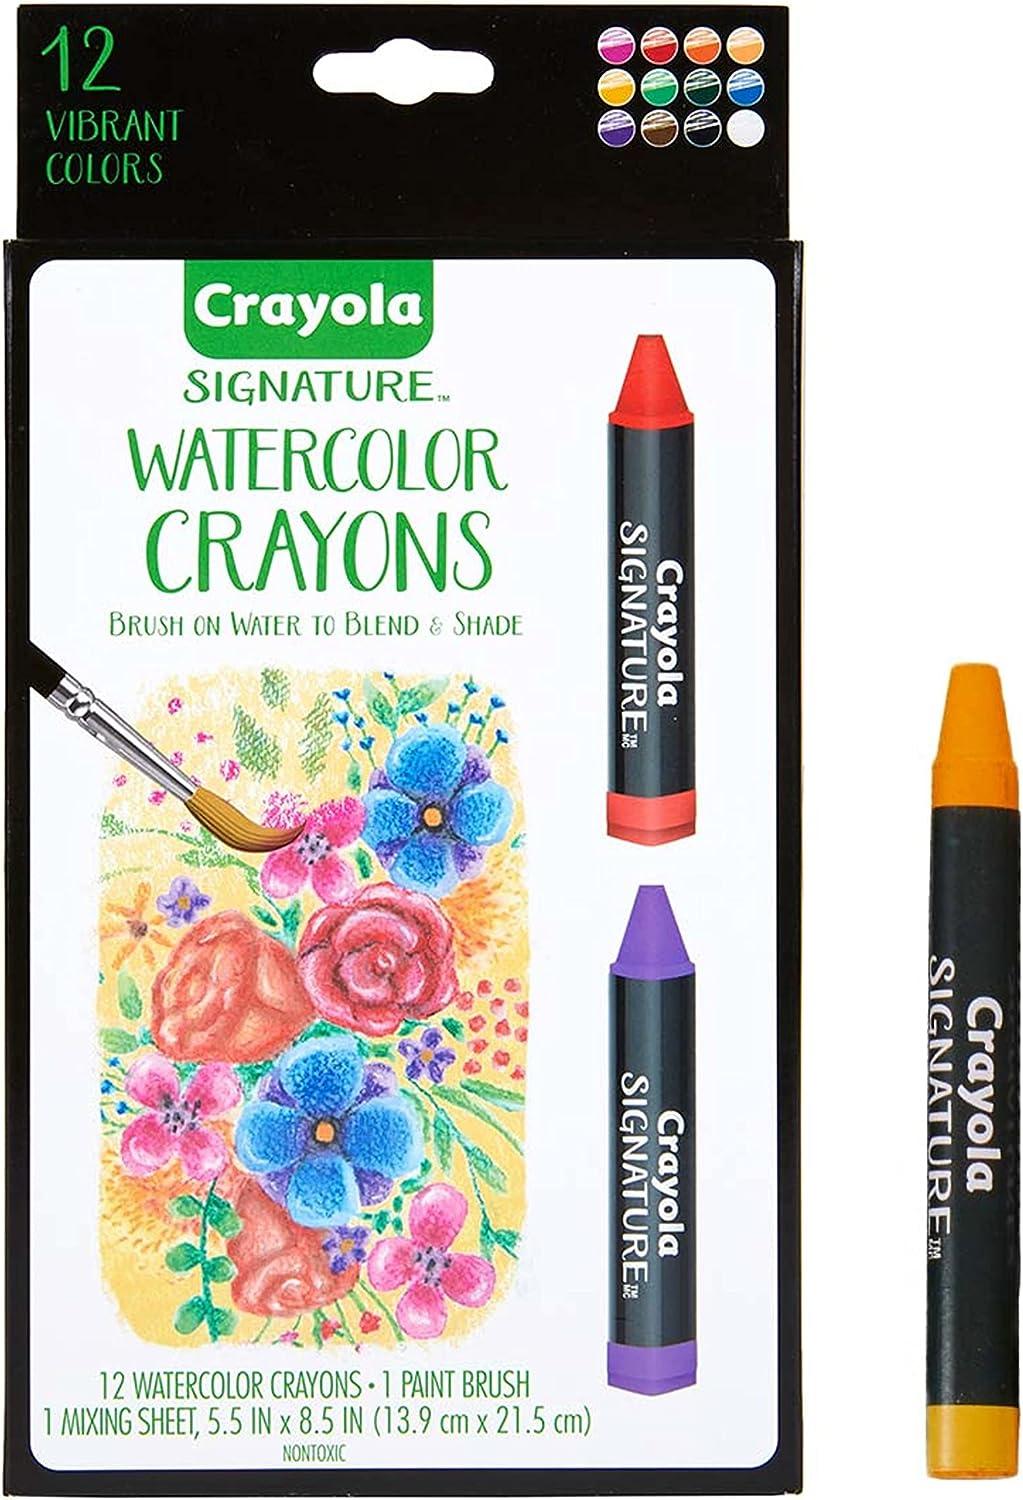 Crayola Metallic Outline Paint Markers, Assorted Colors, 4 Count 